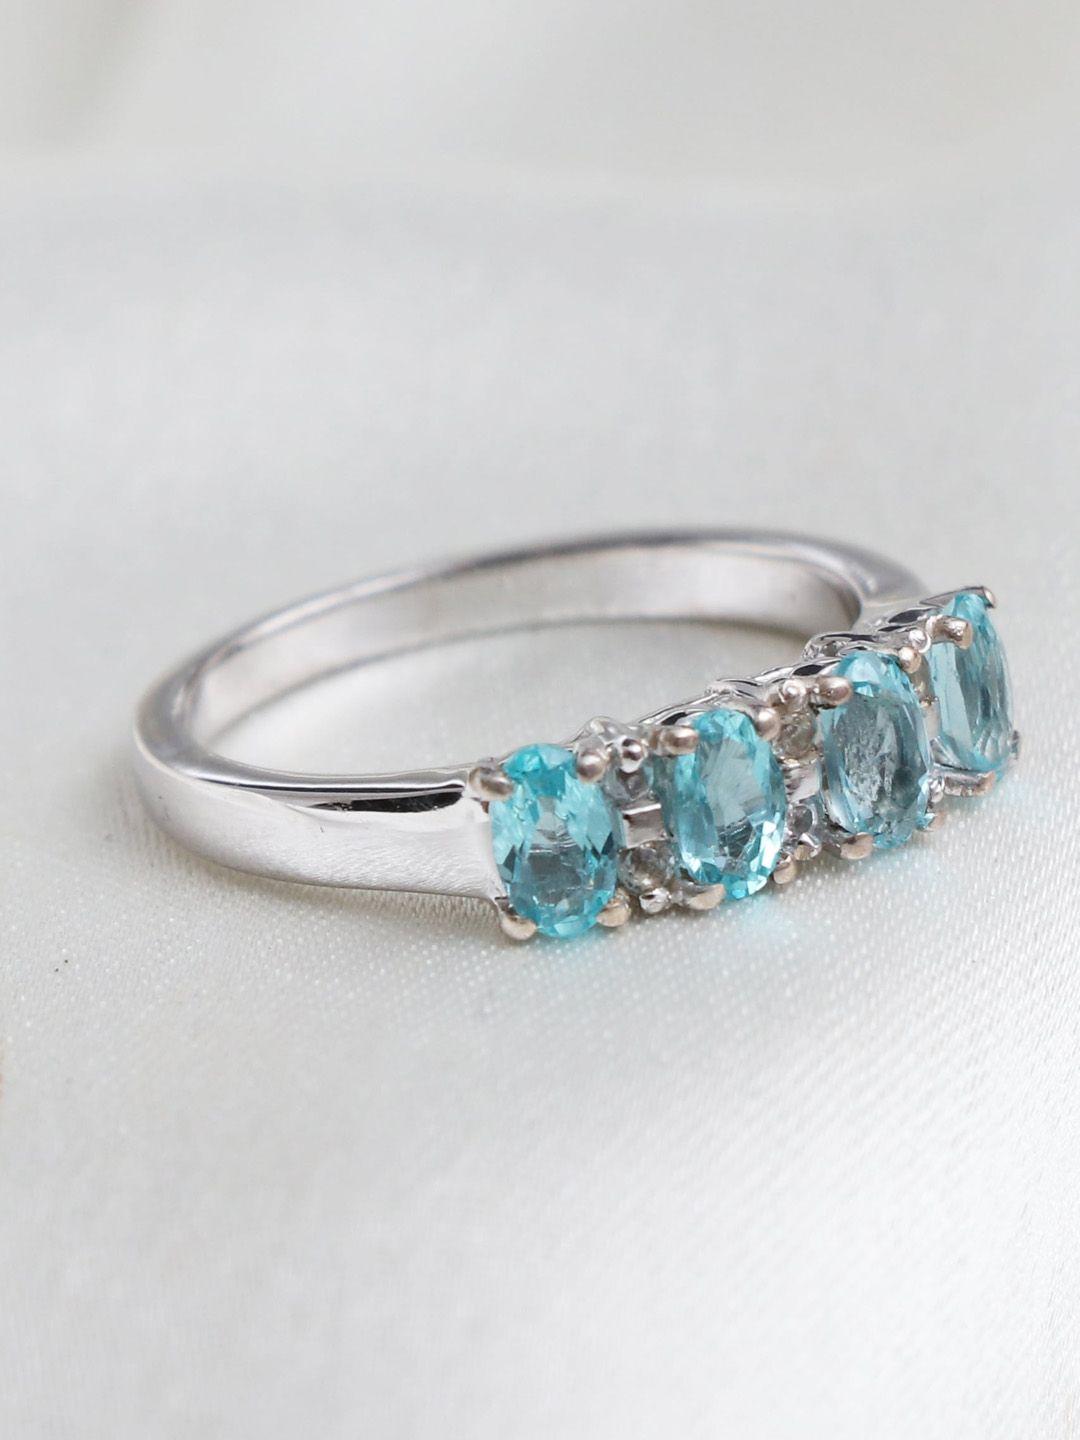 hiflyer jewels rhodium-plated silver-toned blue stone studded finger ring